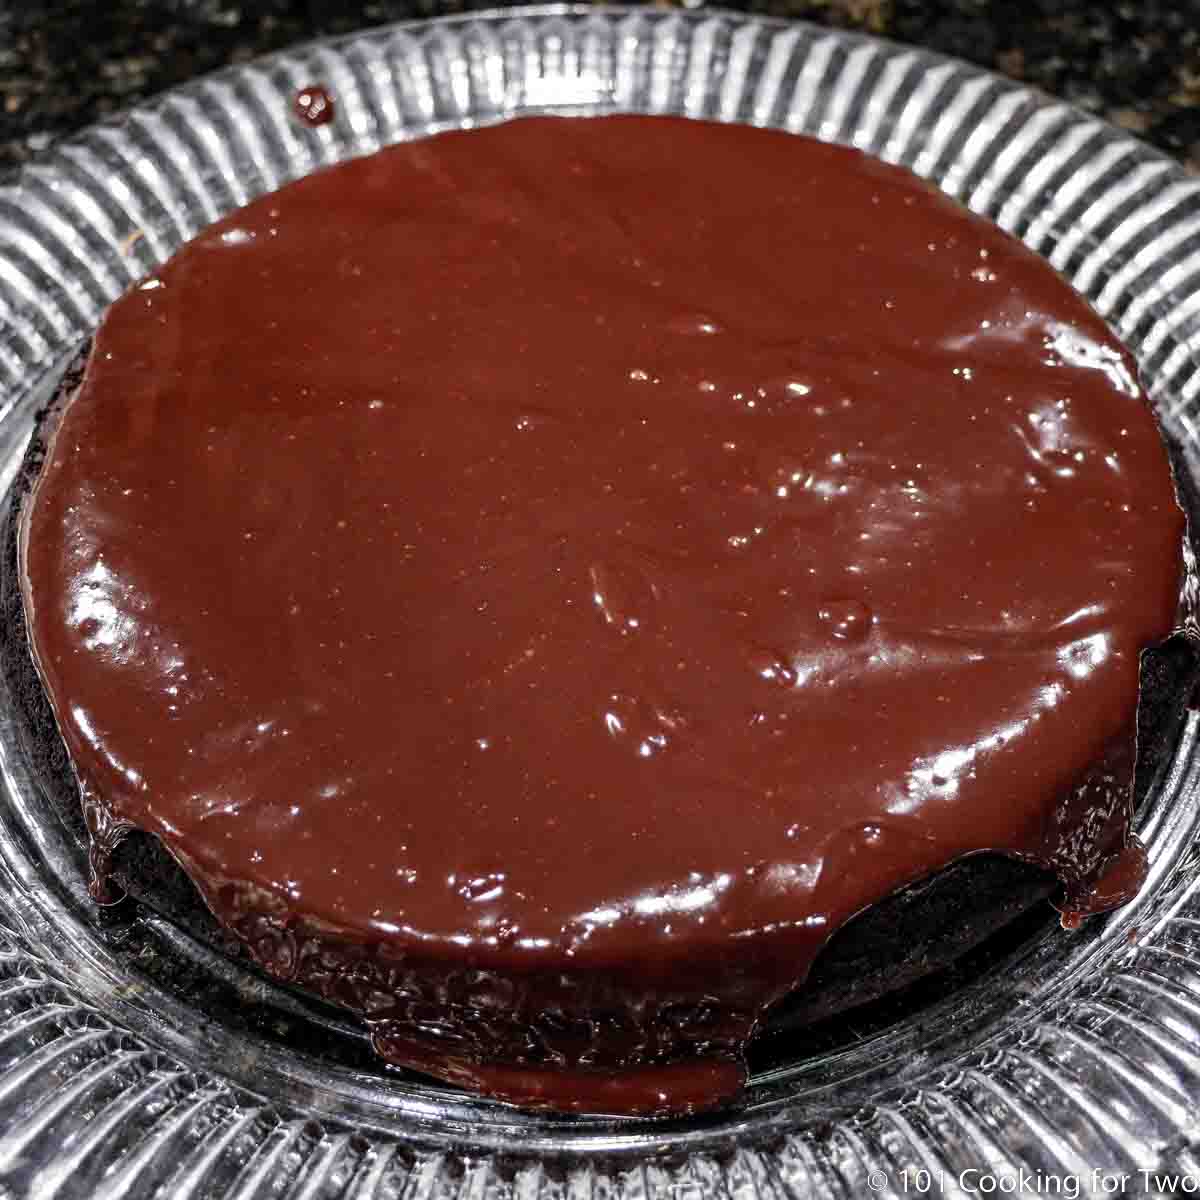 flourless chocolate cake with glaze topping.